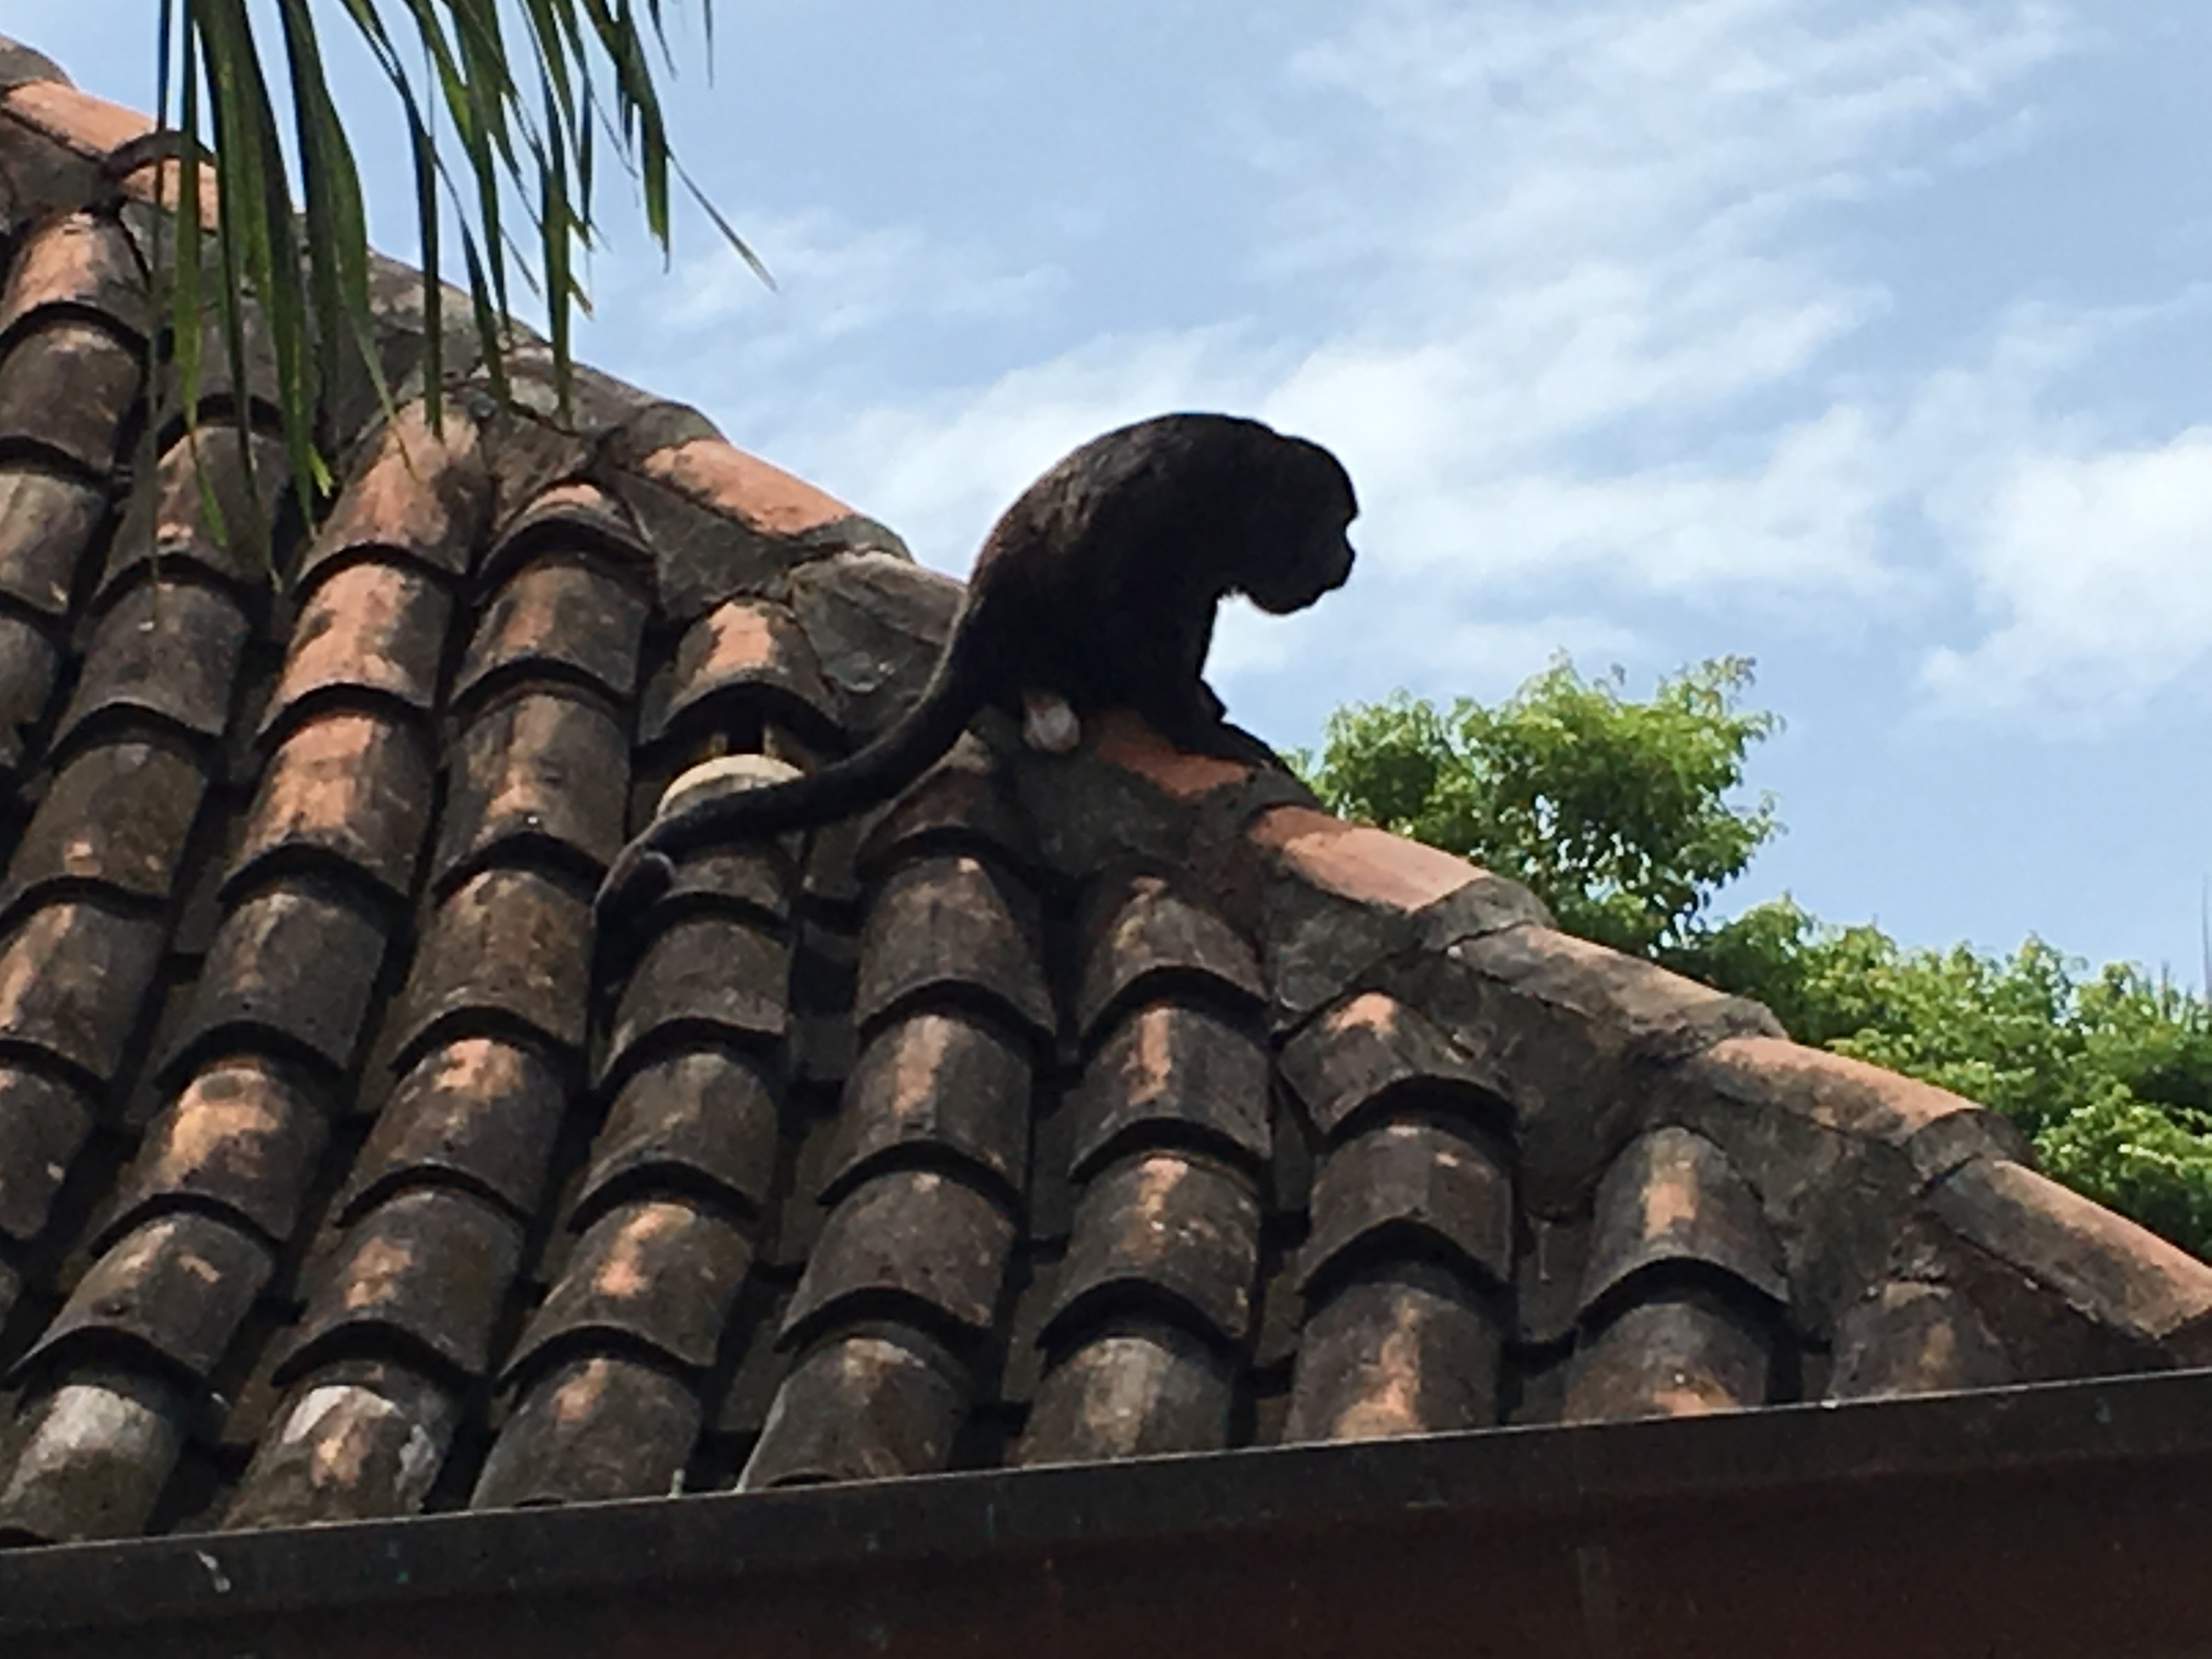 Howler monkey on a roof